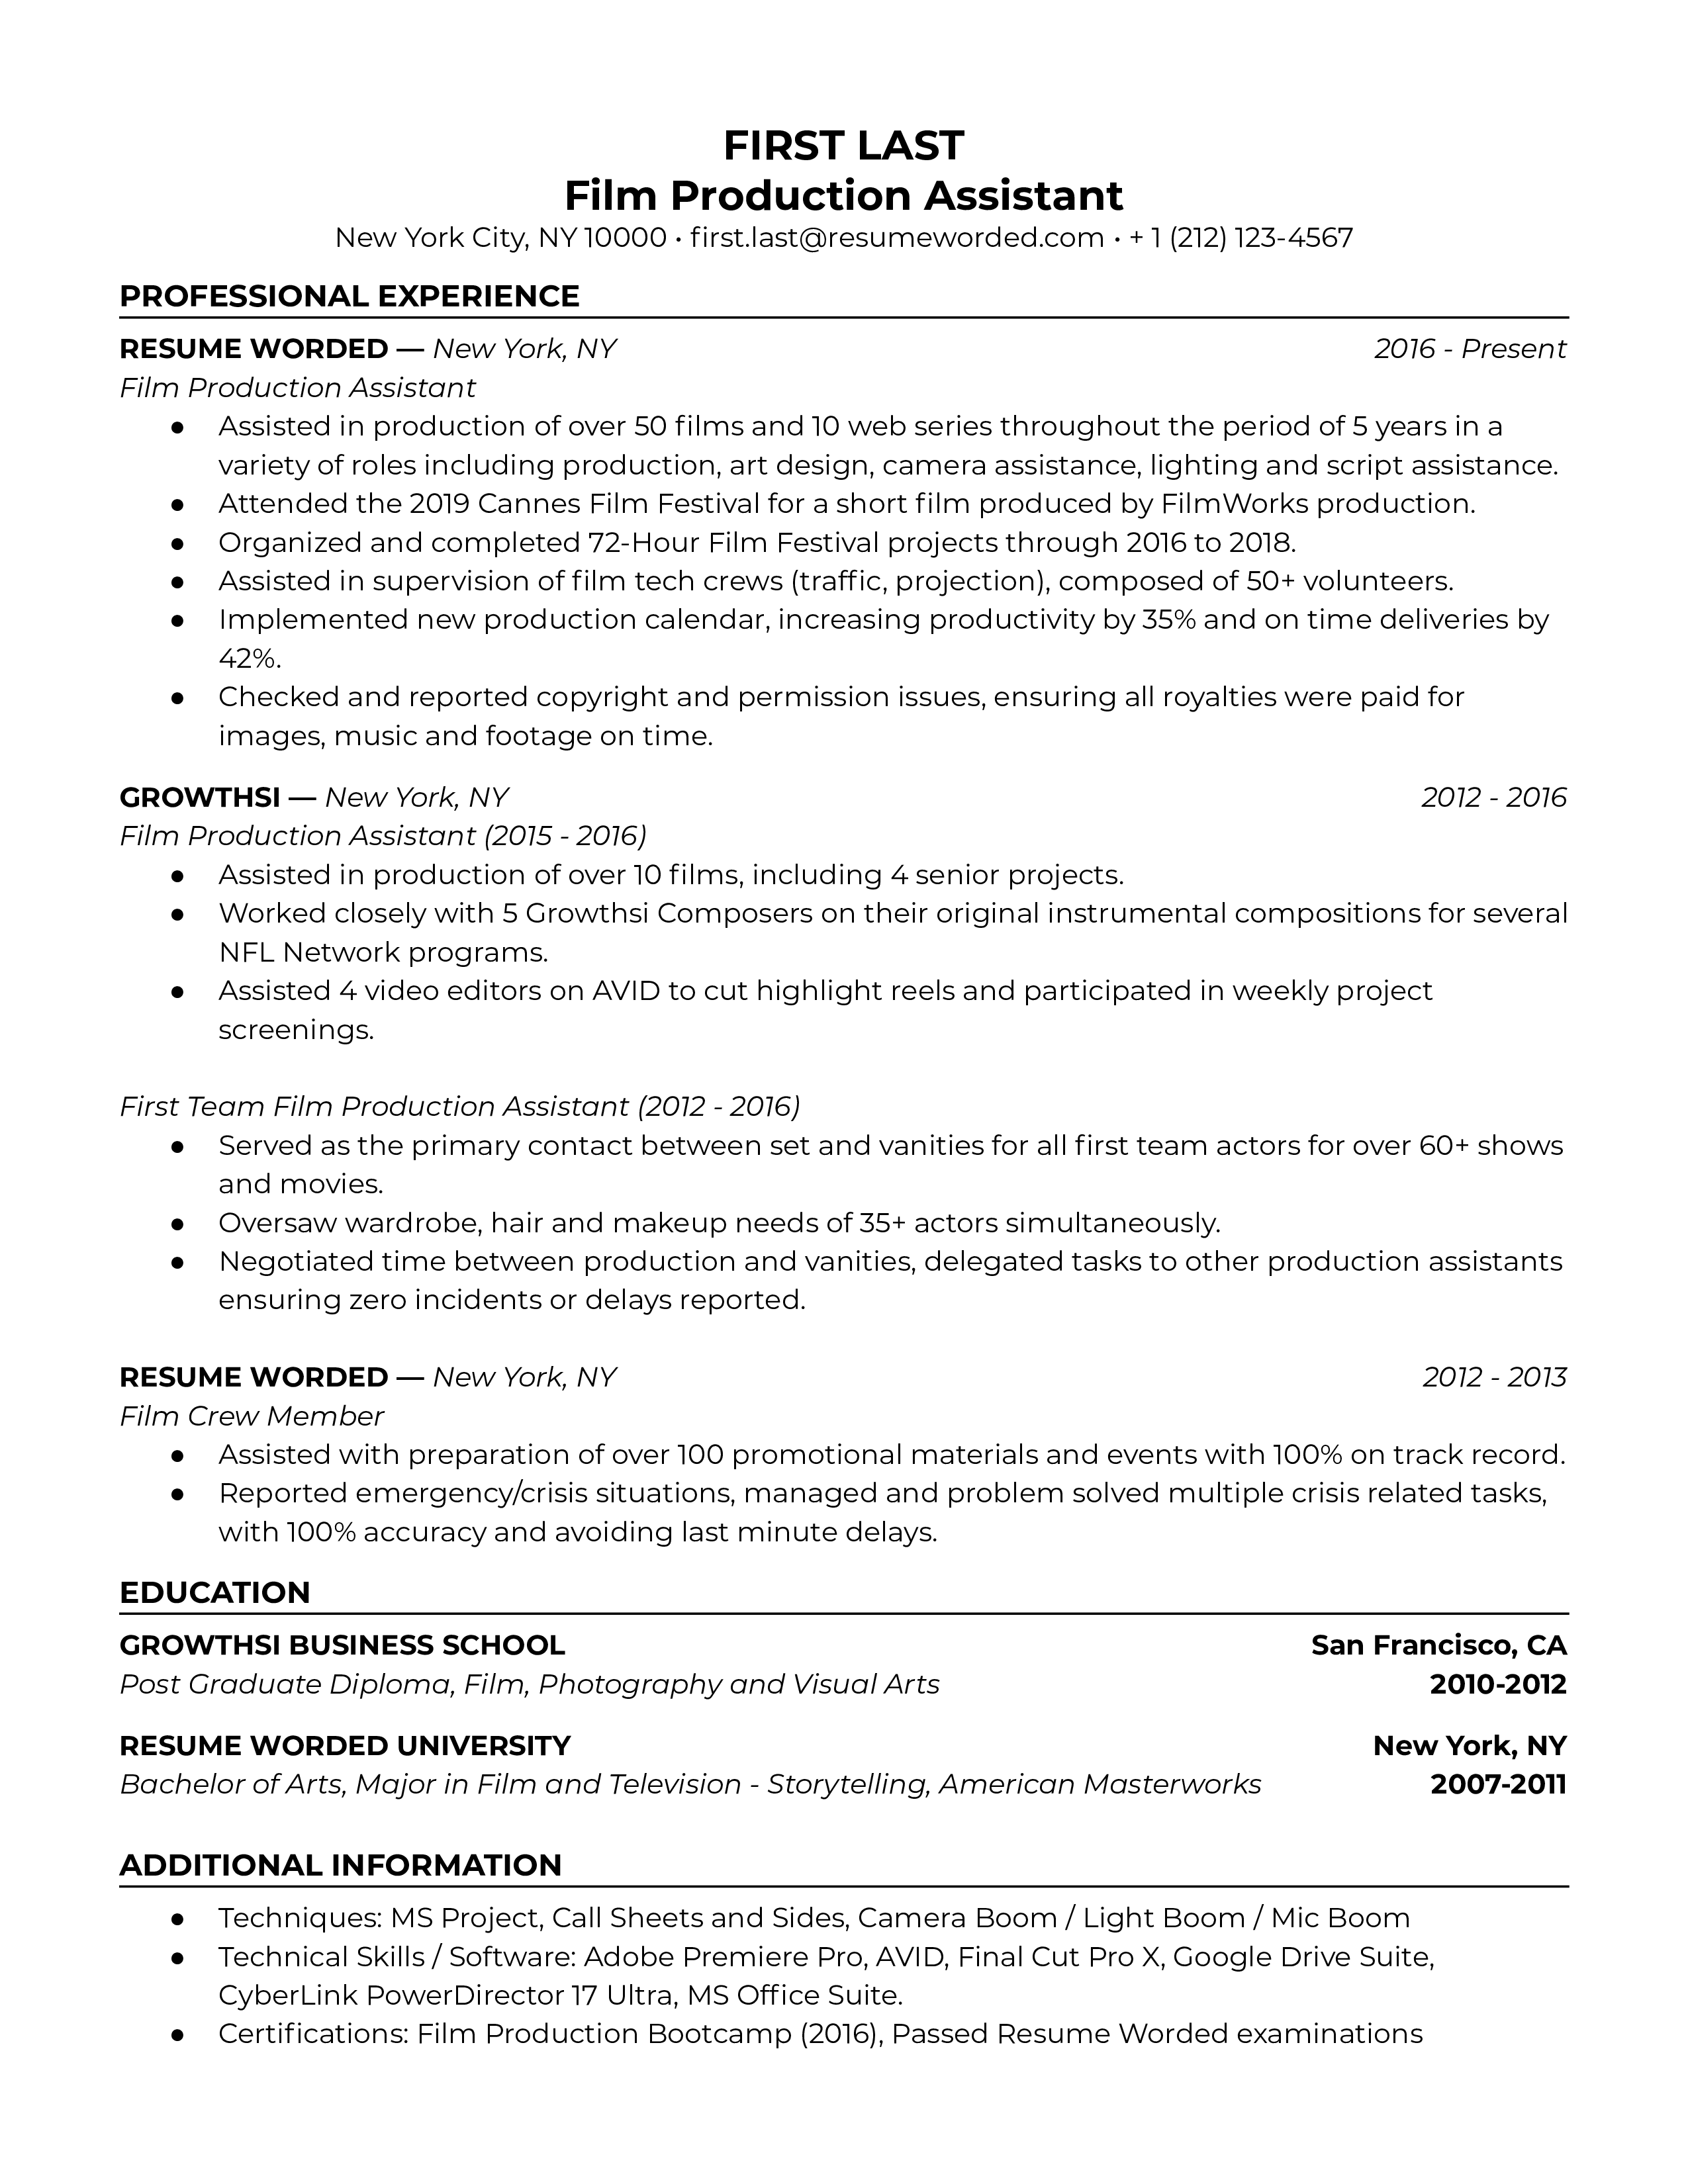 Film Production Assistant Resume Template + Example